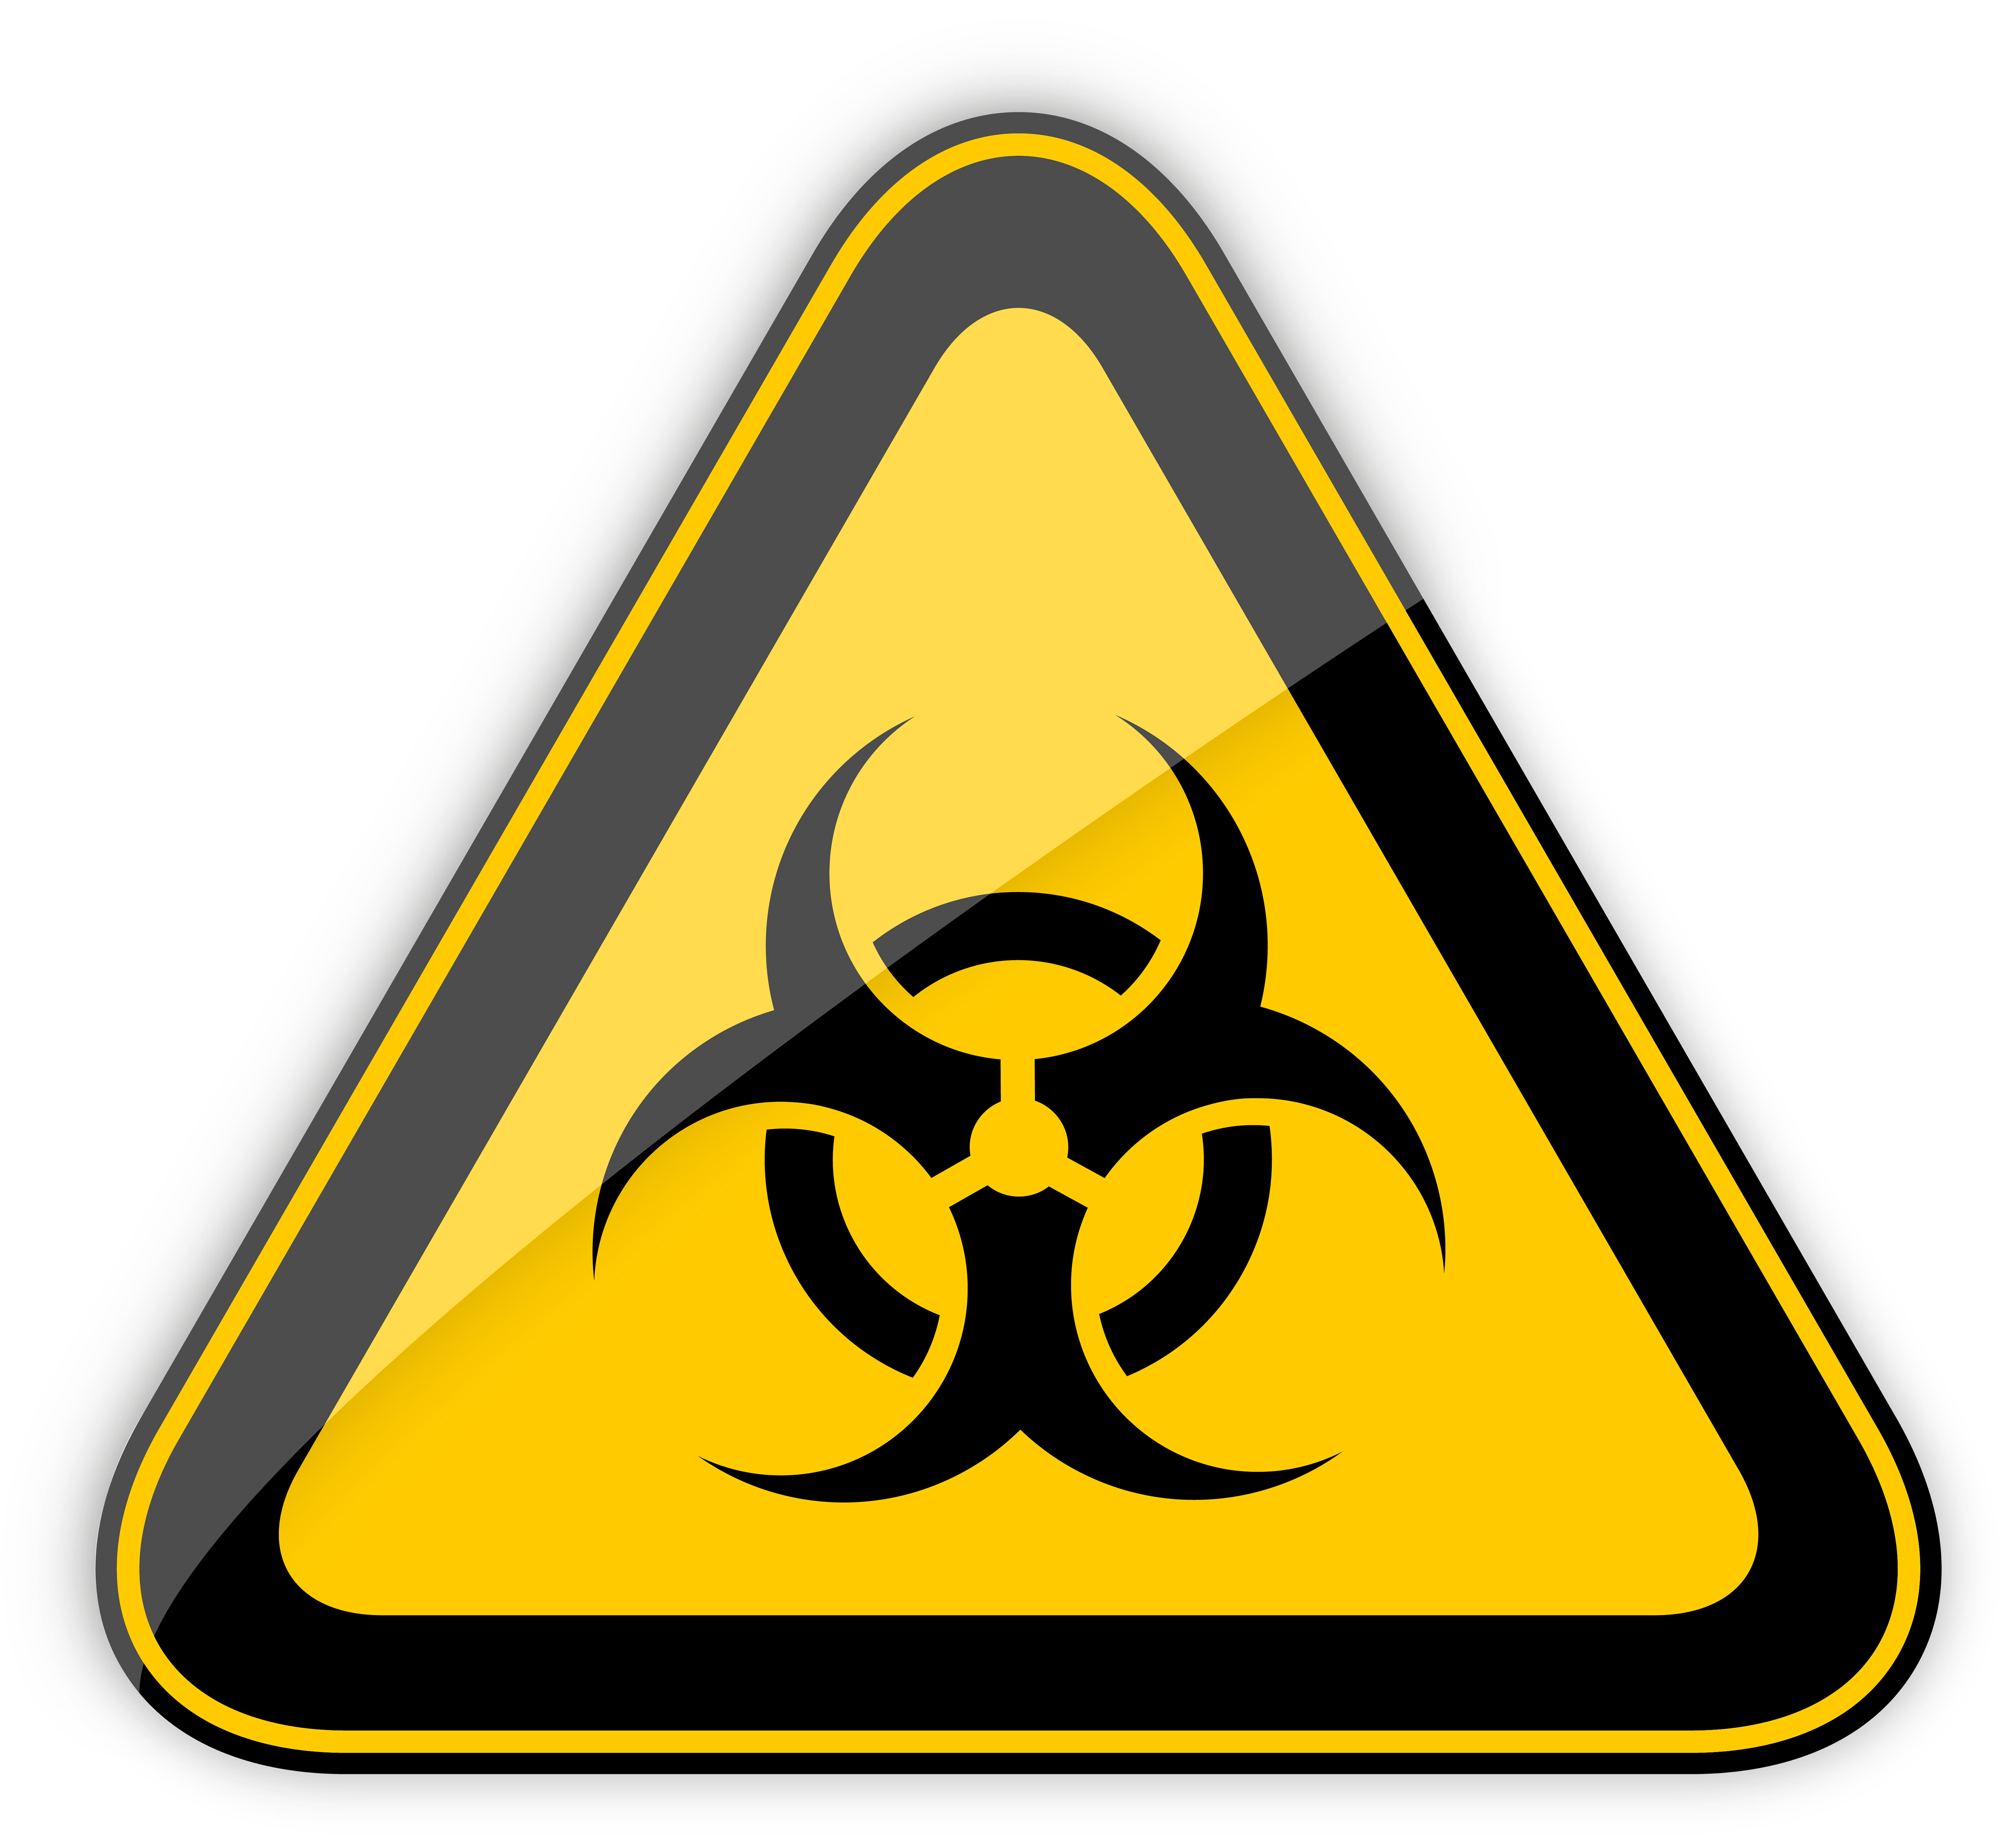 Biohazard Warning Sign PNG Clipart - Best WEB Clipart